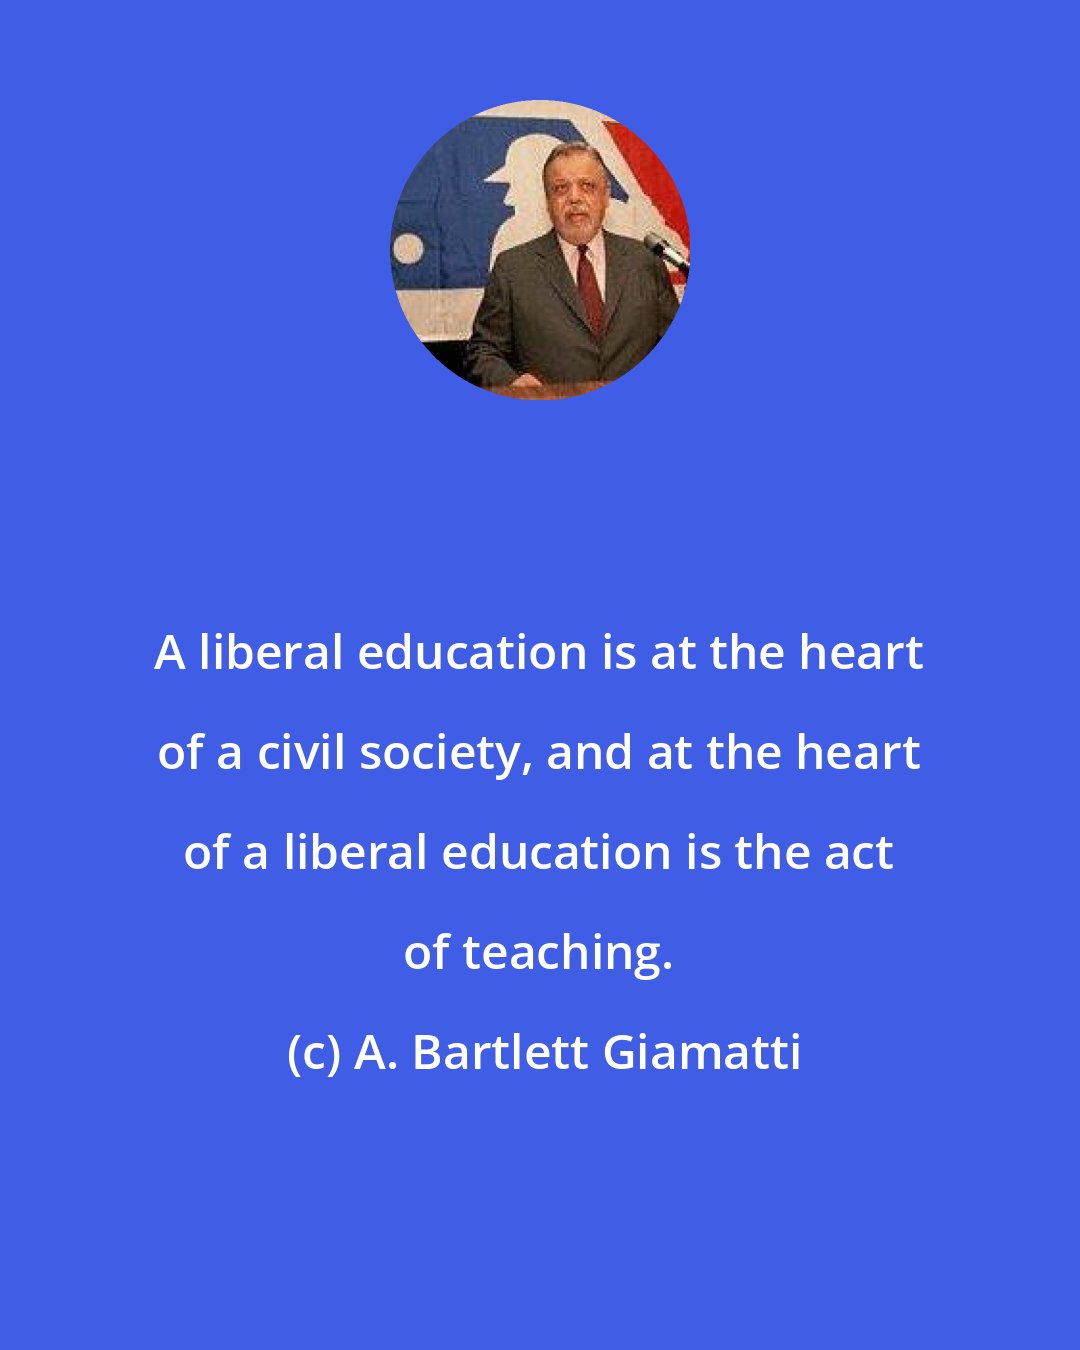 A. Bartlett Giamatti: A liberal education is at the heart of a civil society, and at the heart of a liberal education is the act of teaching.